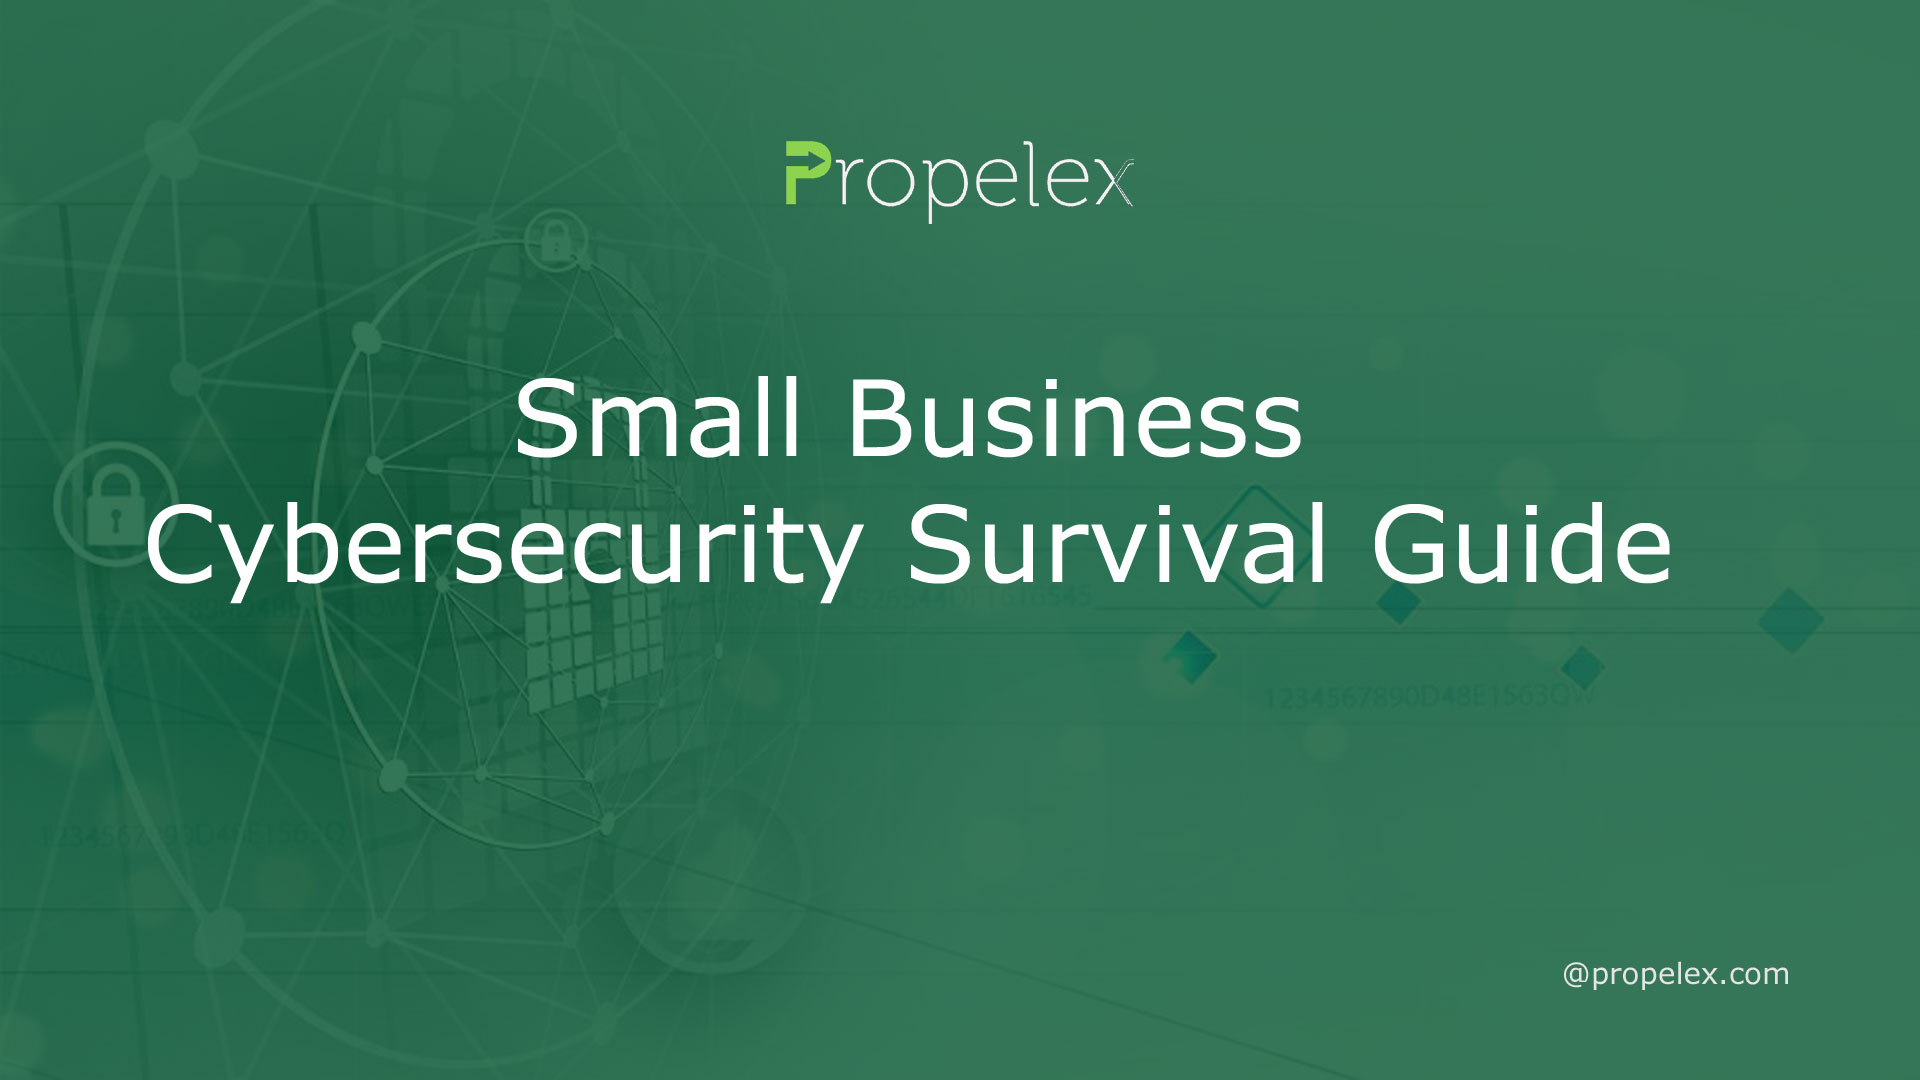 Small Business Cybersecurity Survival Guide